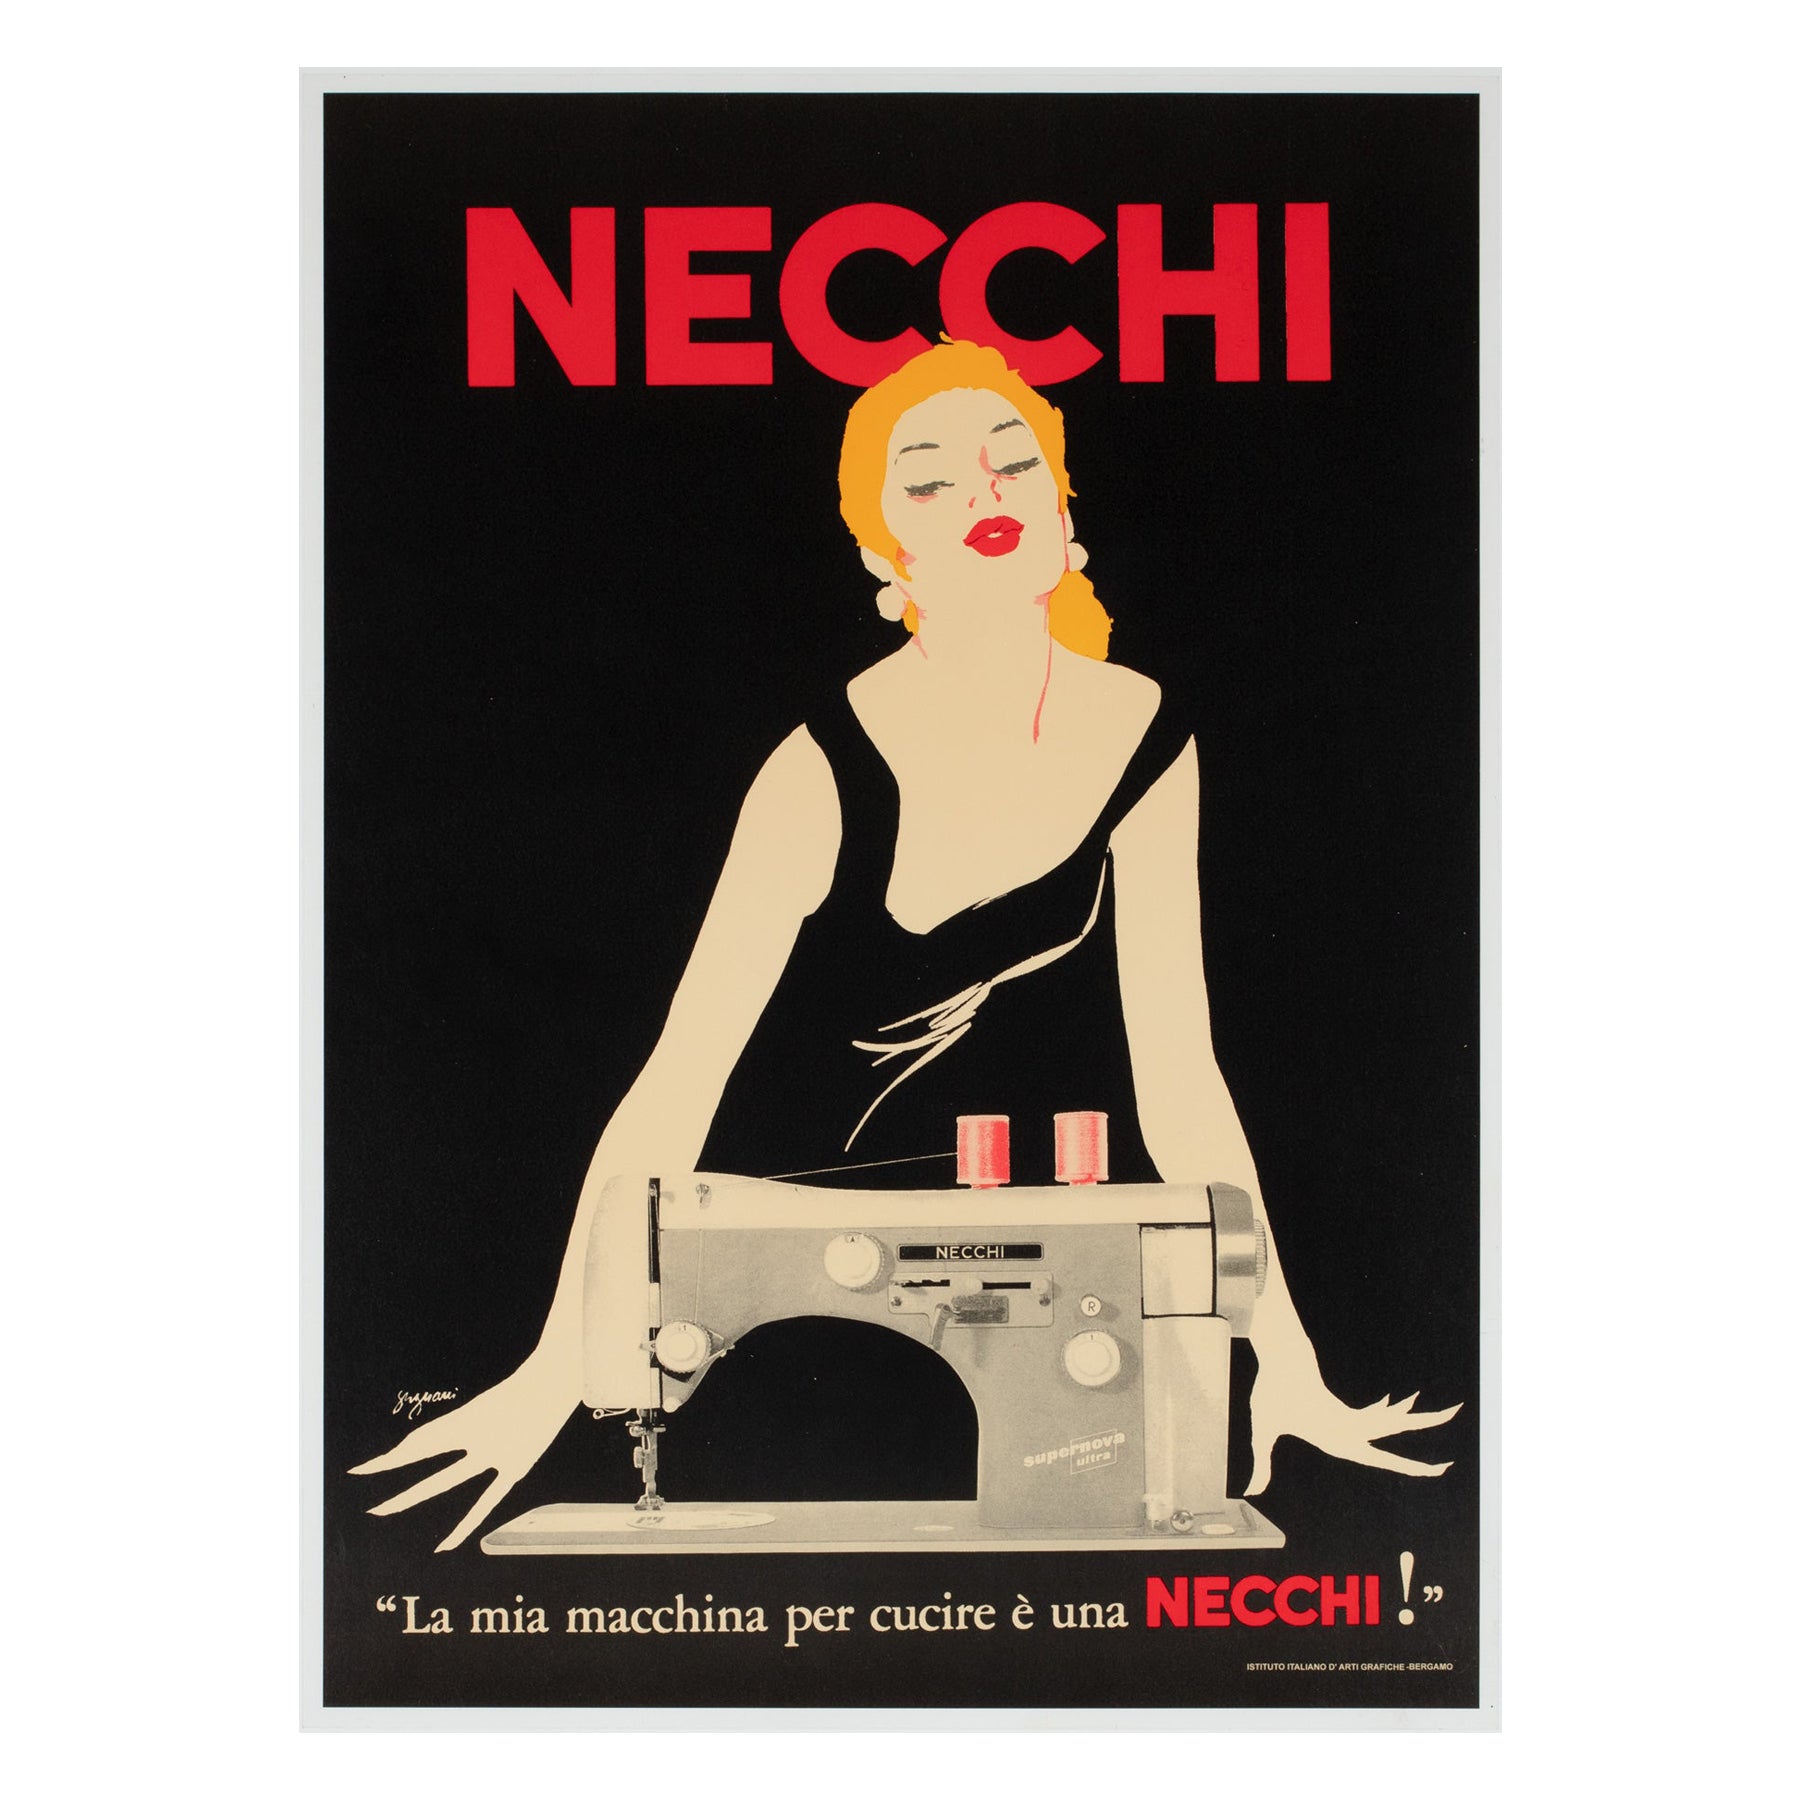 Necchi 1980s Italian Sewing Machine Advertising Poster, Jeanne Grignani For Sale